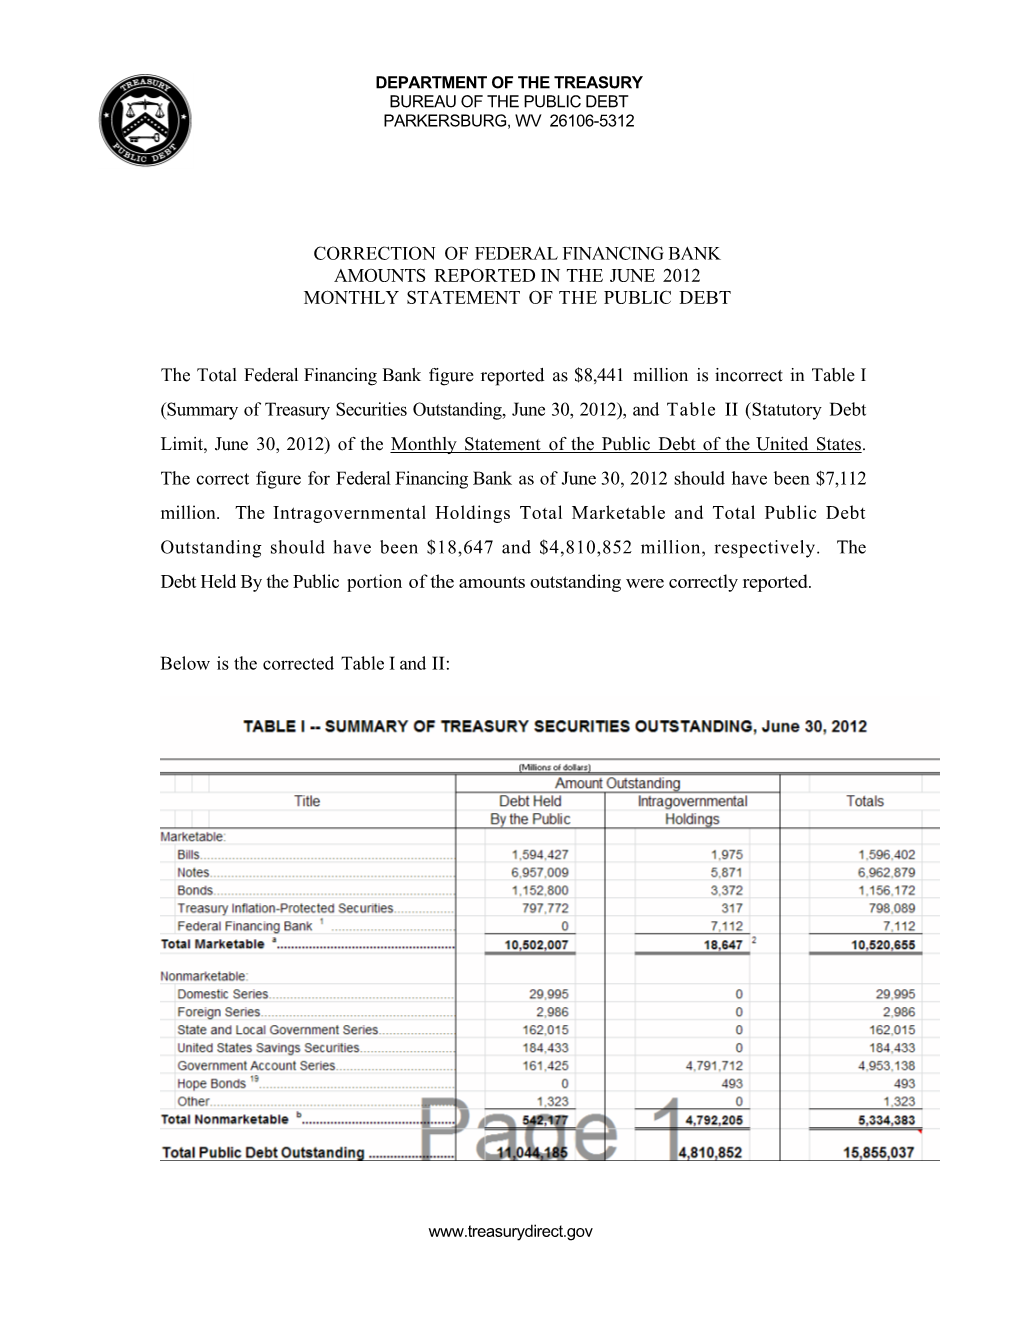 Correction of Federal Financing Bank Amounts Reported in the June 2012 Monthly Statement of the Public Debt